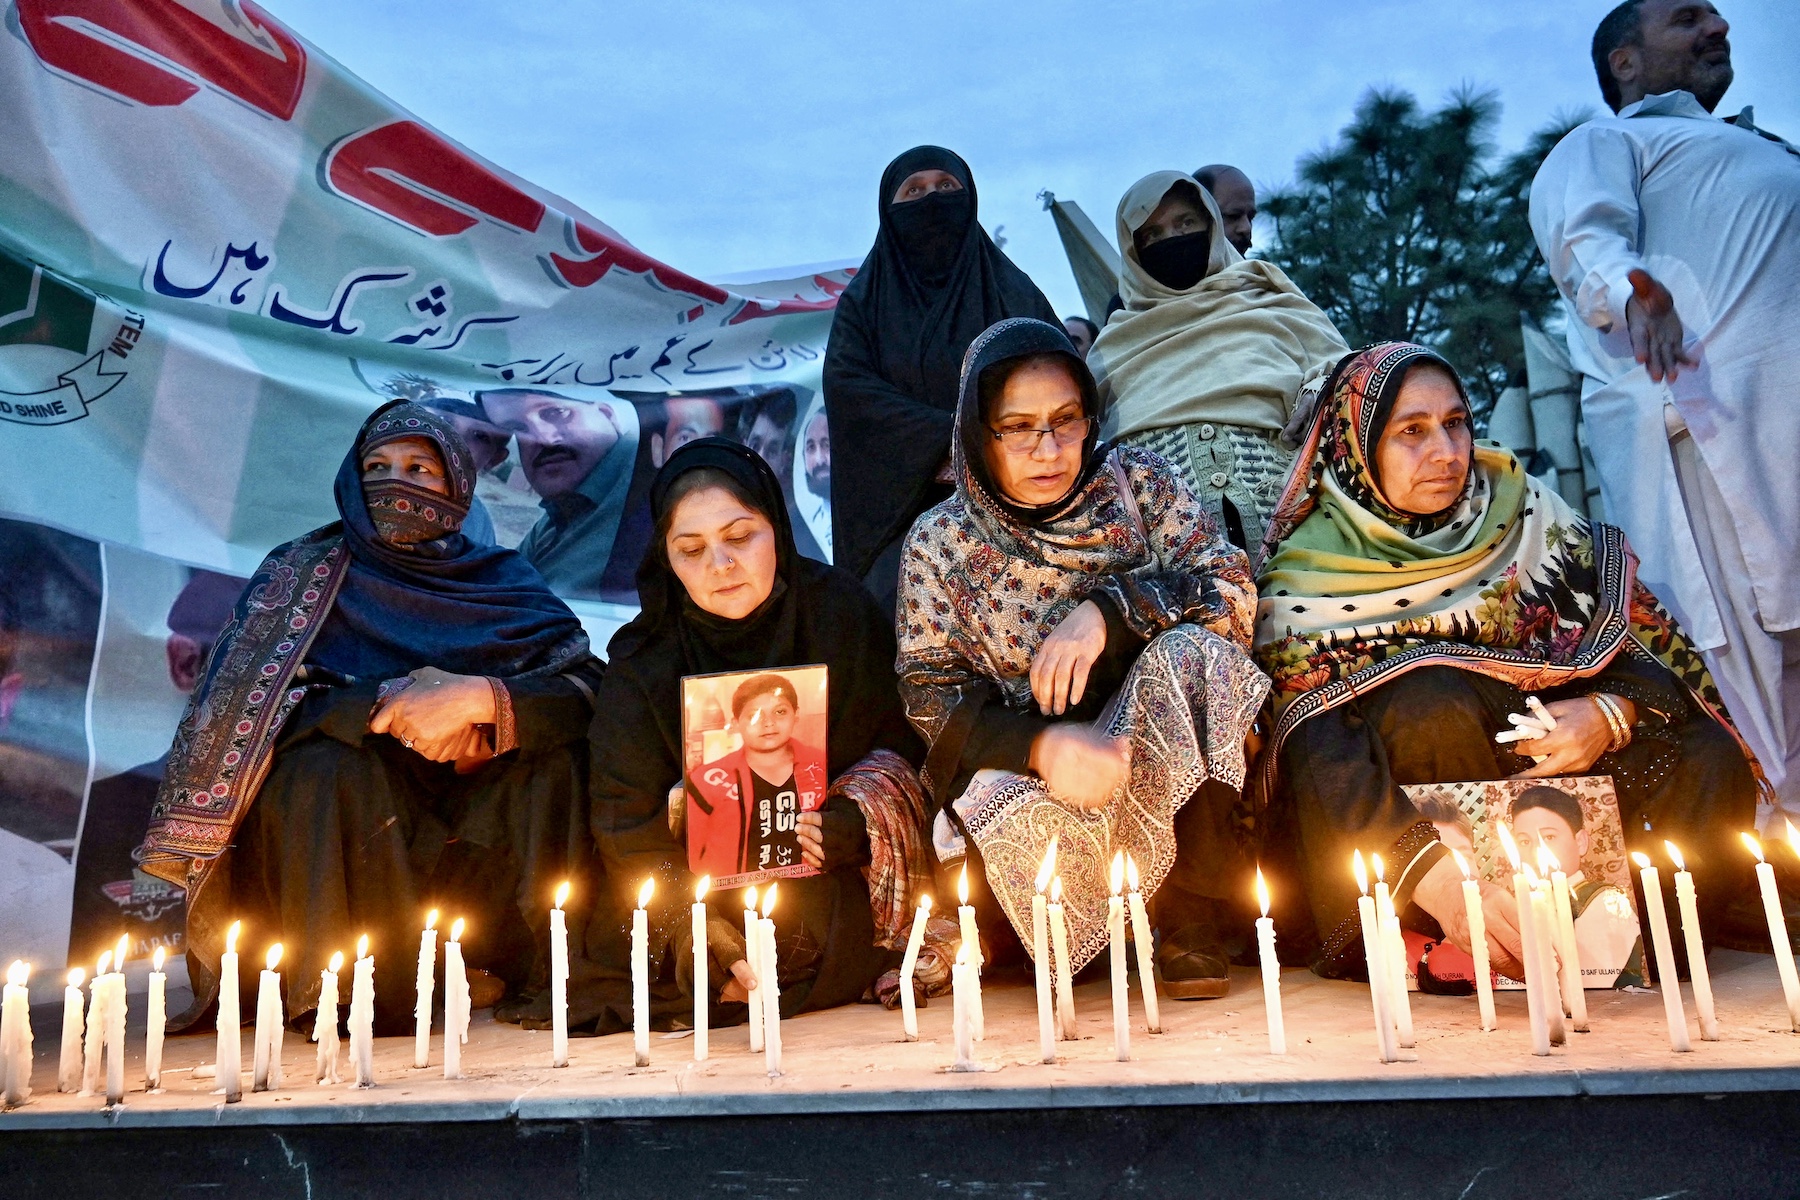 pakistan women praying at the altar of the dead after suicide bomber attack